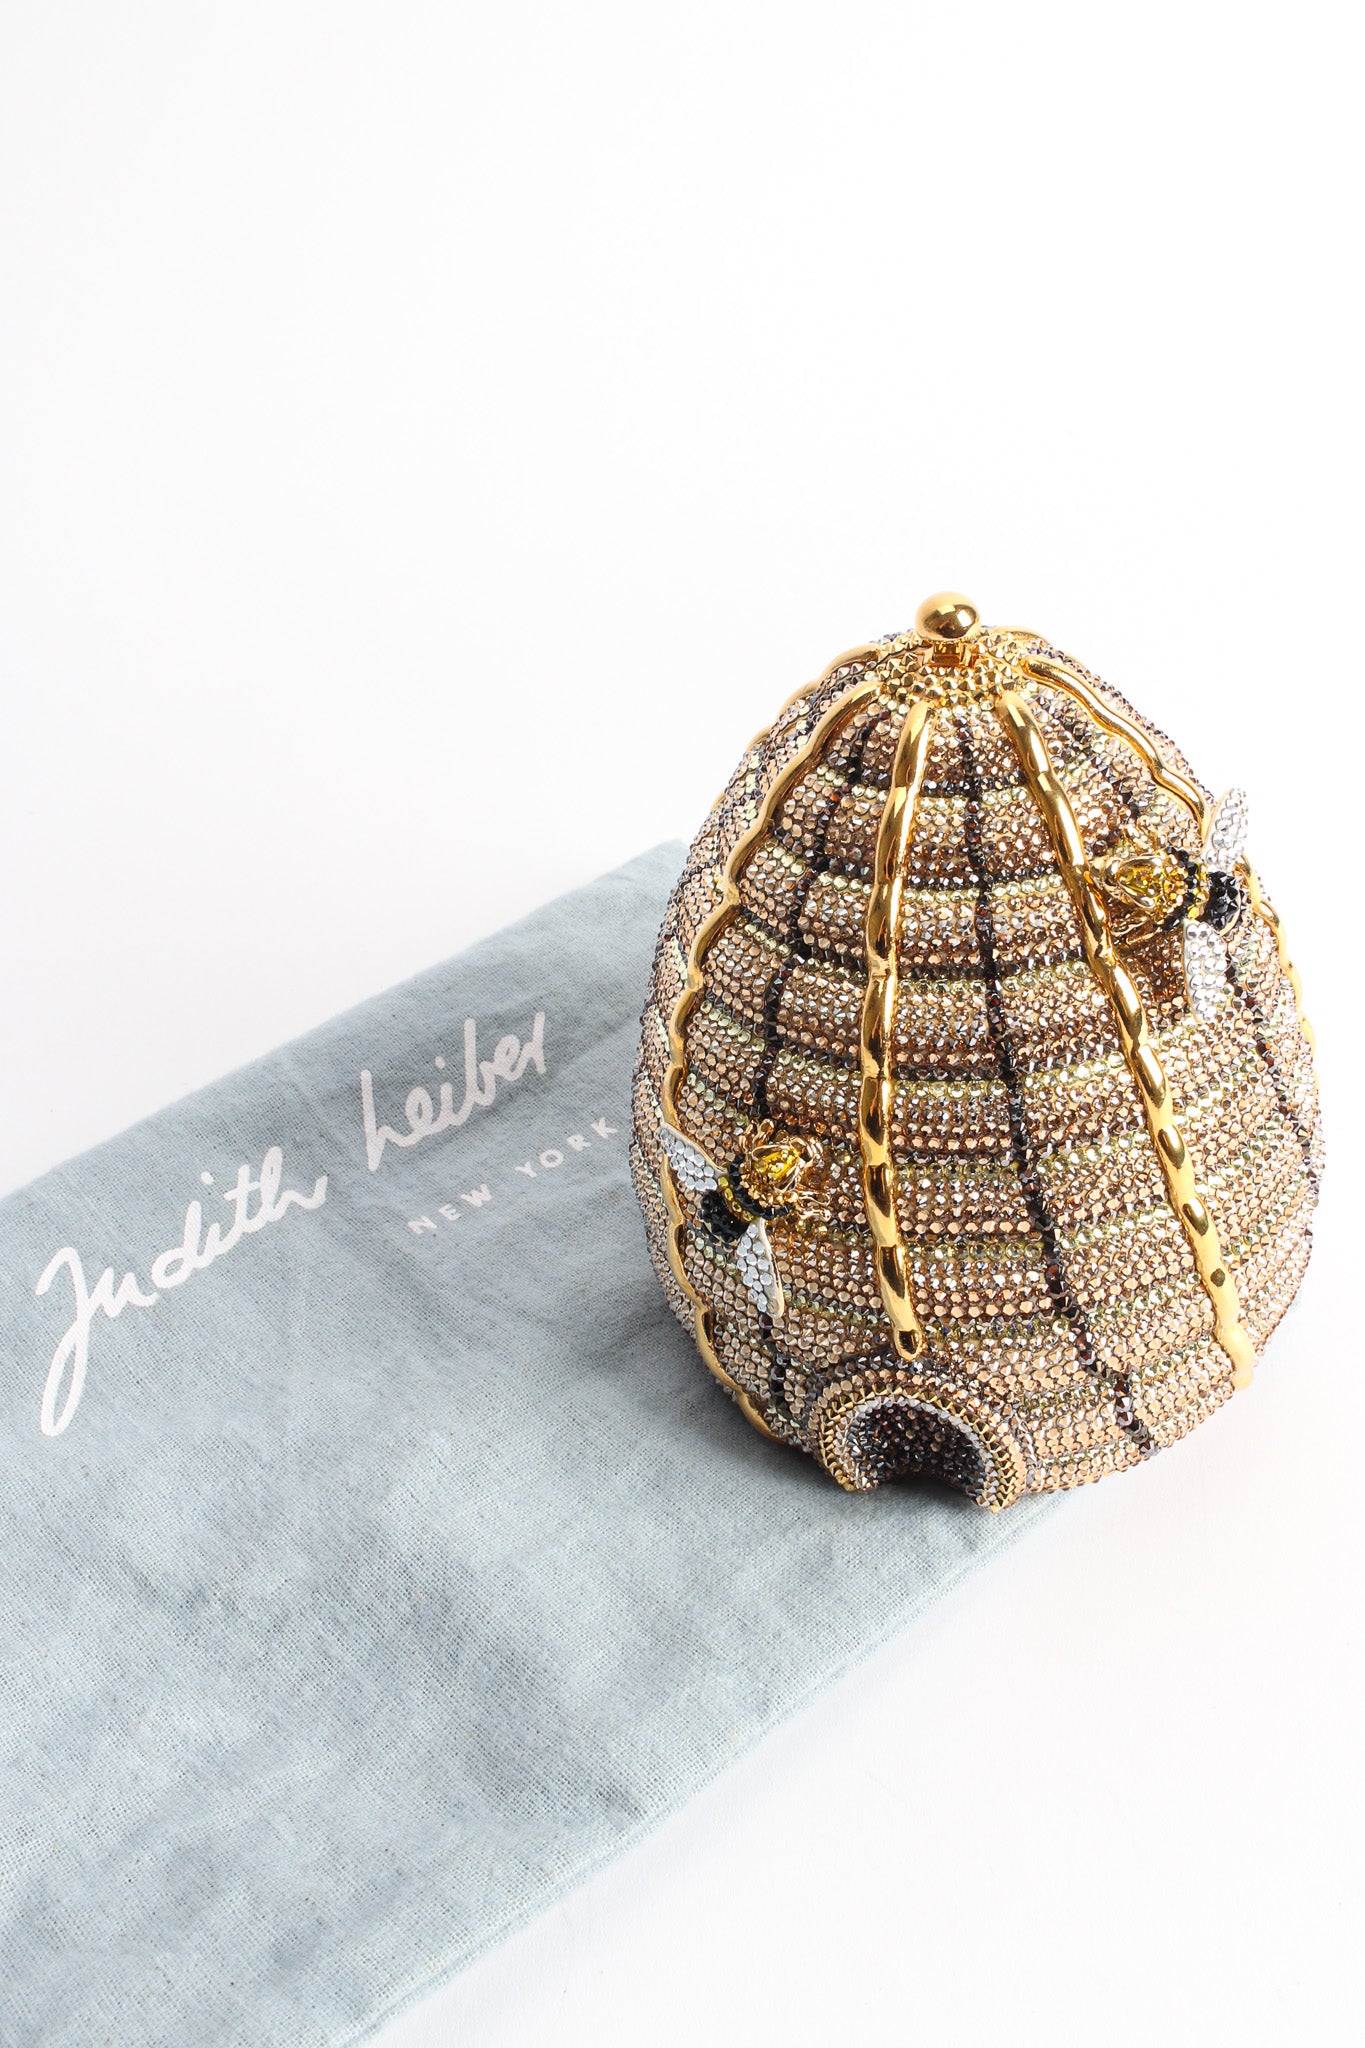 Vintage Judith Leiber Beehive Crystal Clutch Bag with dust bag @ Recess Los Angeles